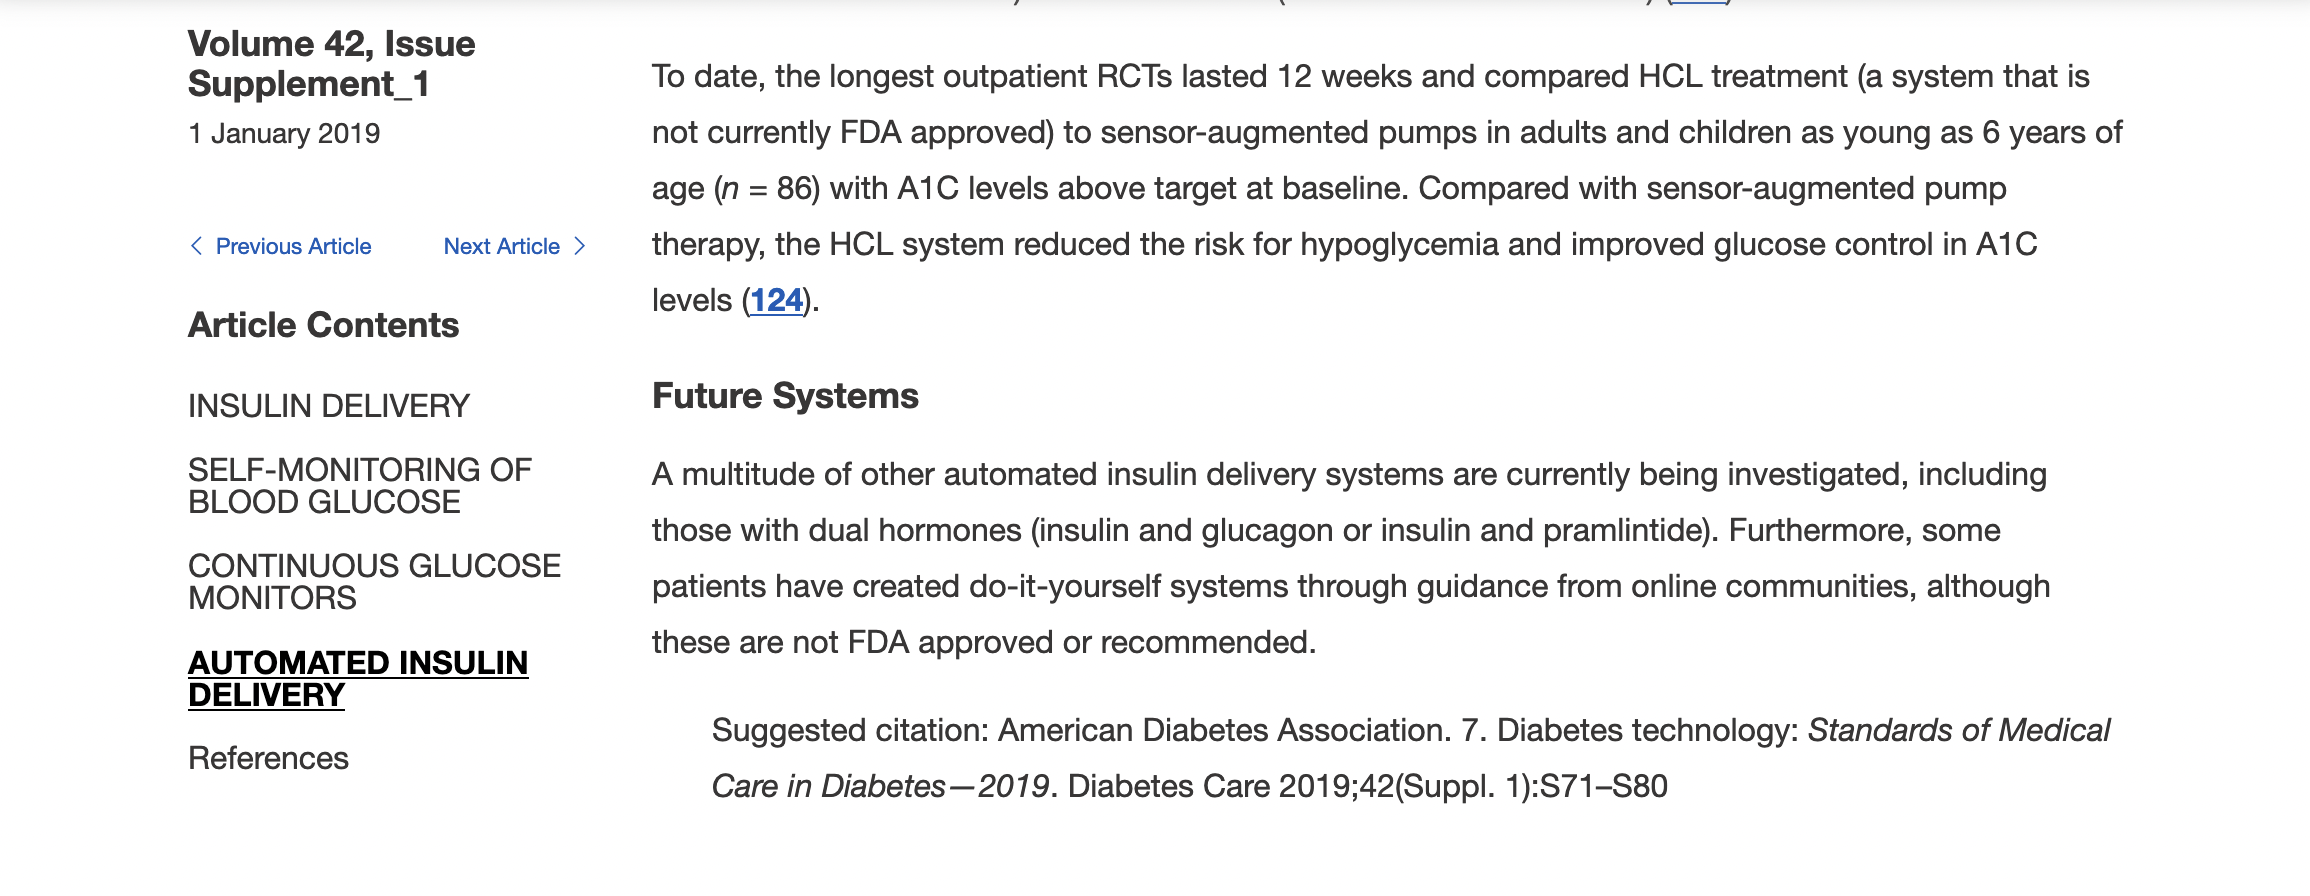 A screenshot of the 2019 ADA Standards of Care under Diabetes Technology (7) that lists DIY closed looping, meaning open source automated insulin delivery